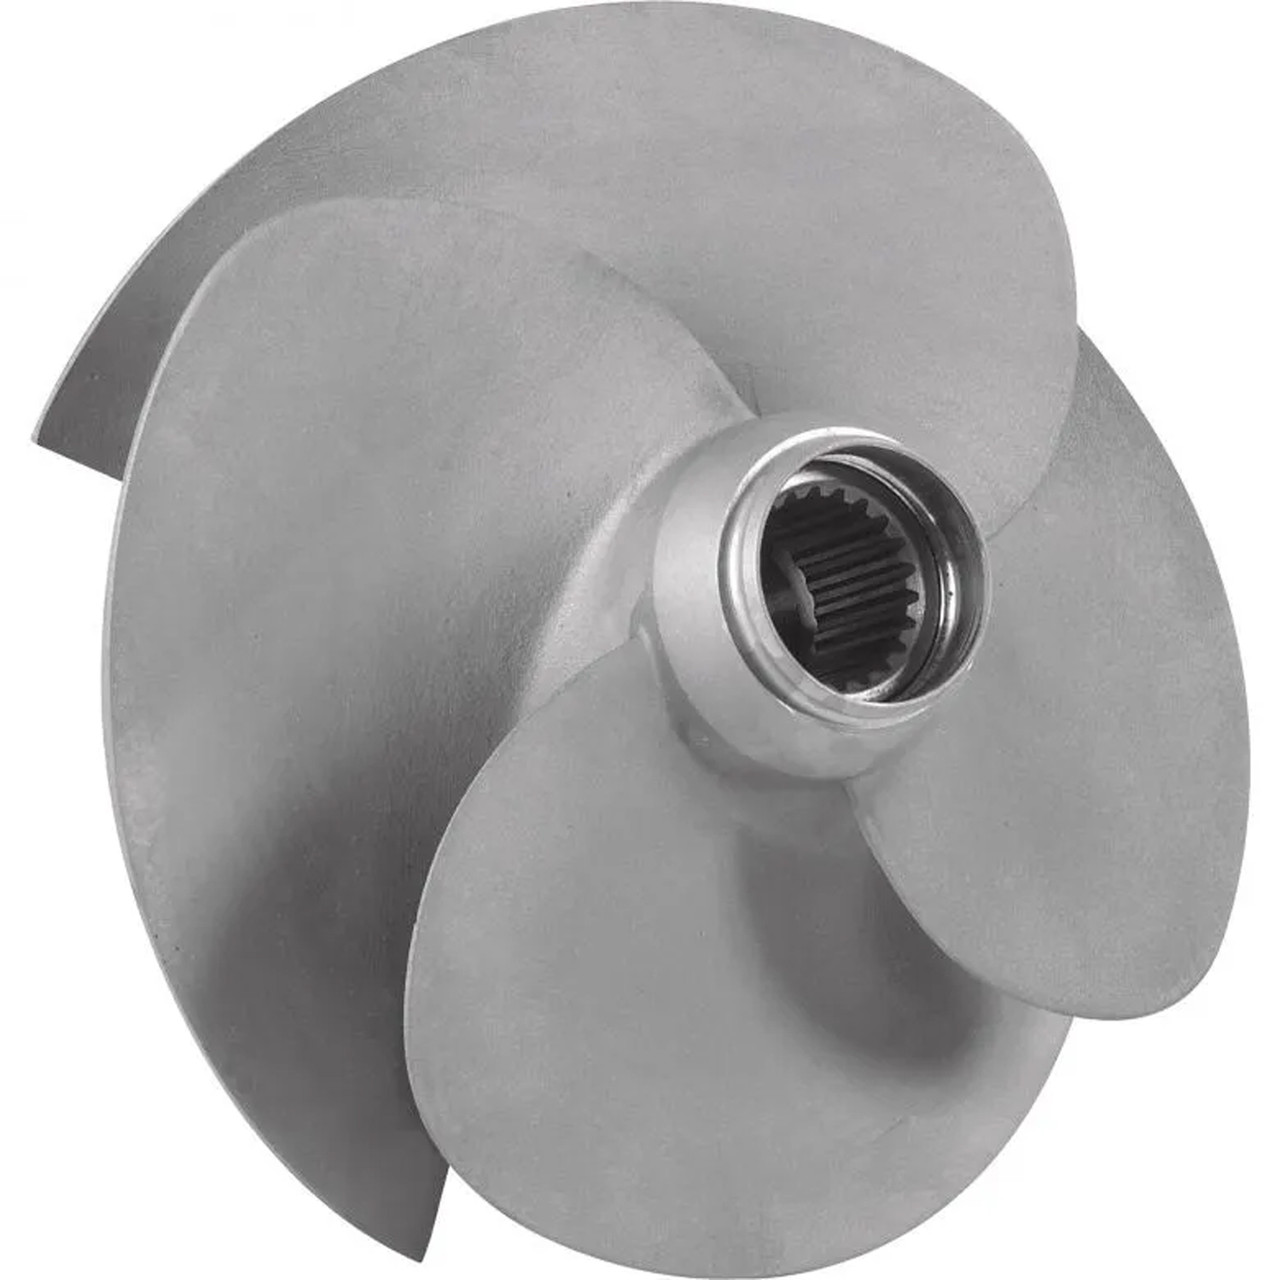 Sea-Doo New OEM, 2018-2019 GTX 155 and WAKE 155 Impeller Assembly, 267001019